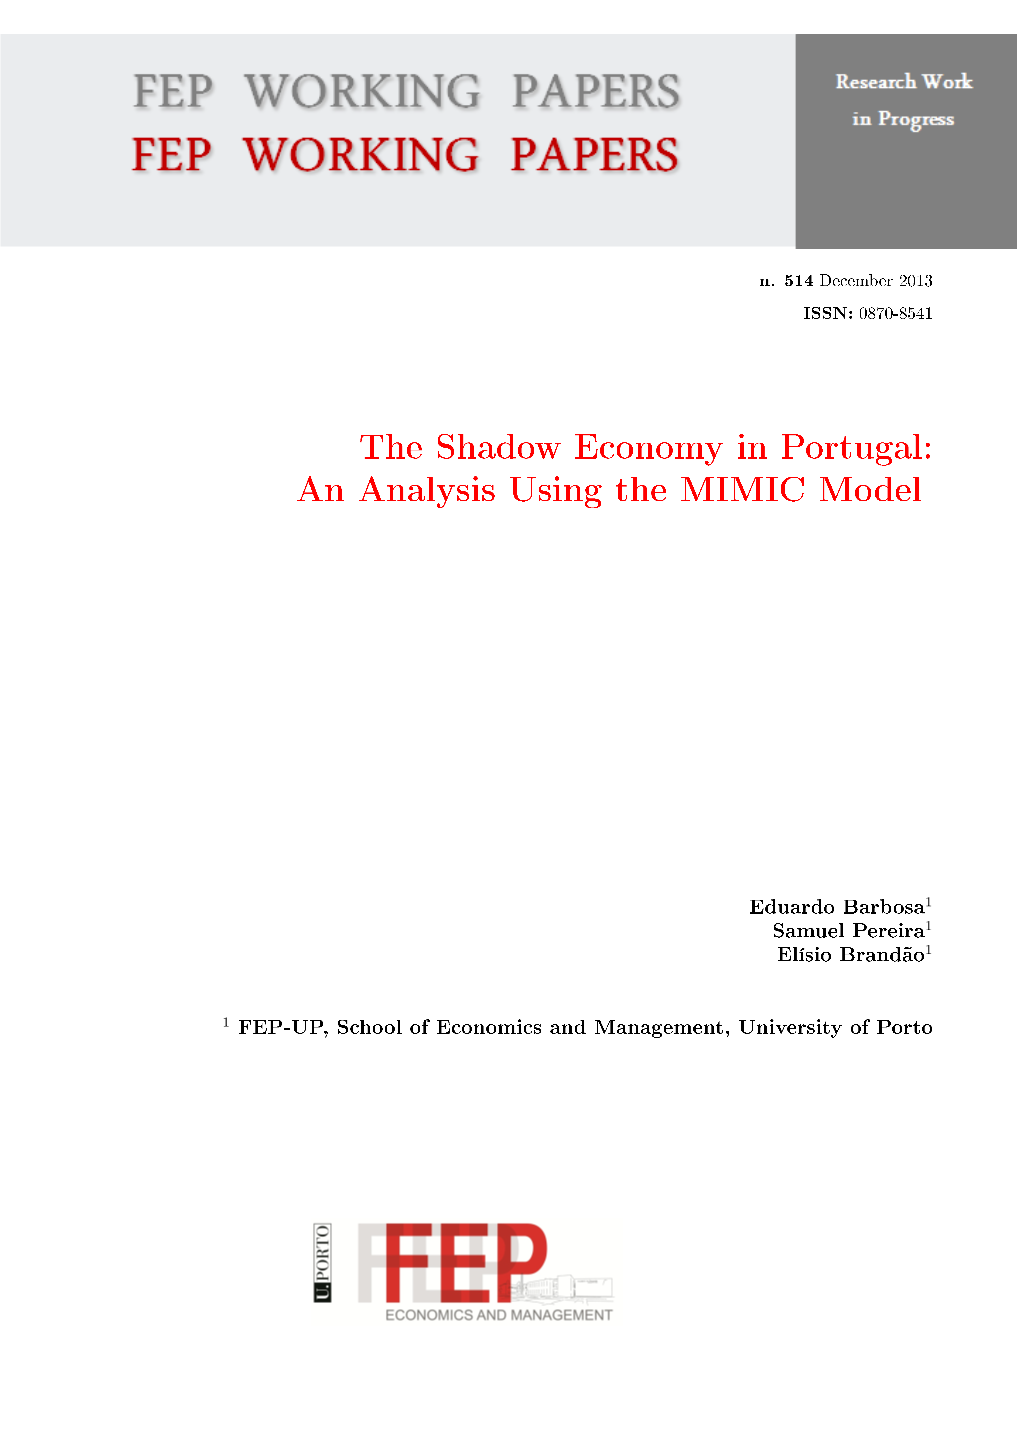 The Shadow Economy in Portugal: an Analysis Using the MIMIC Model